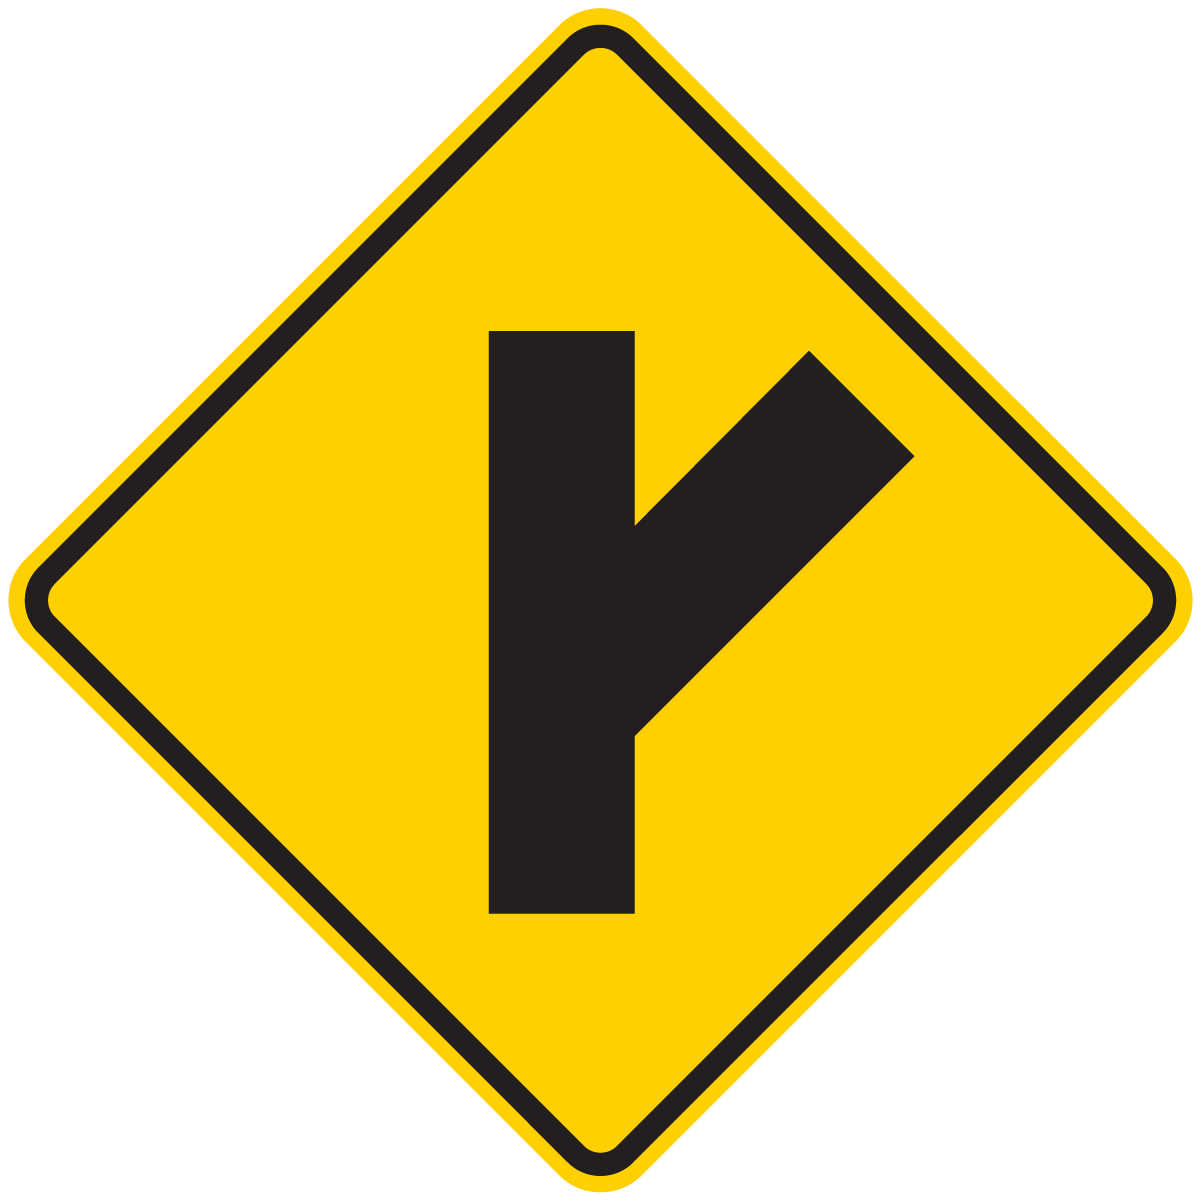 W2-3 Diagonal Side Road Intersection (Left or Right)